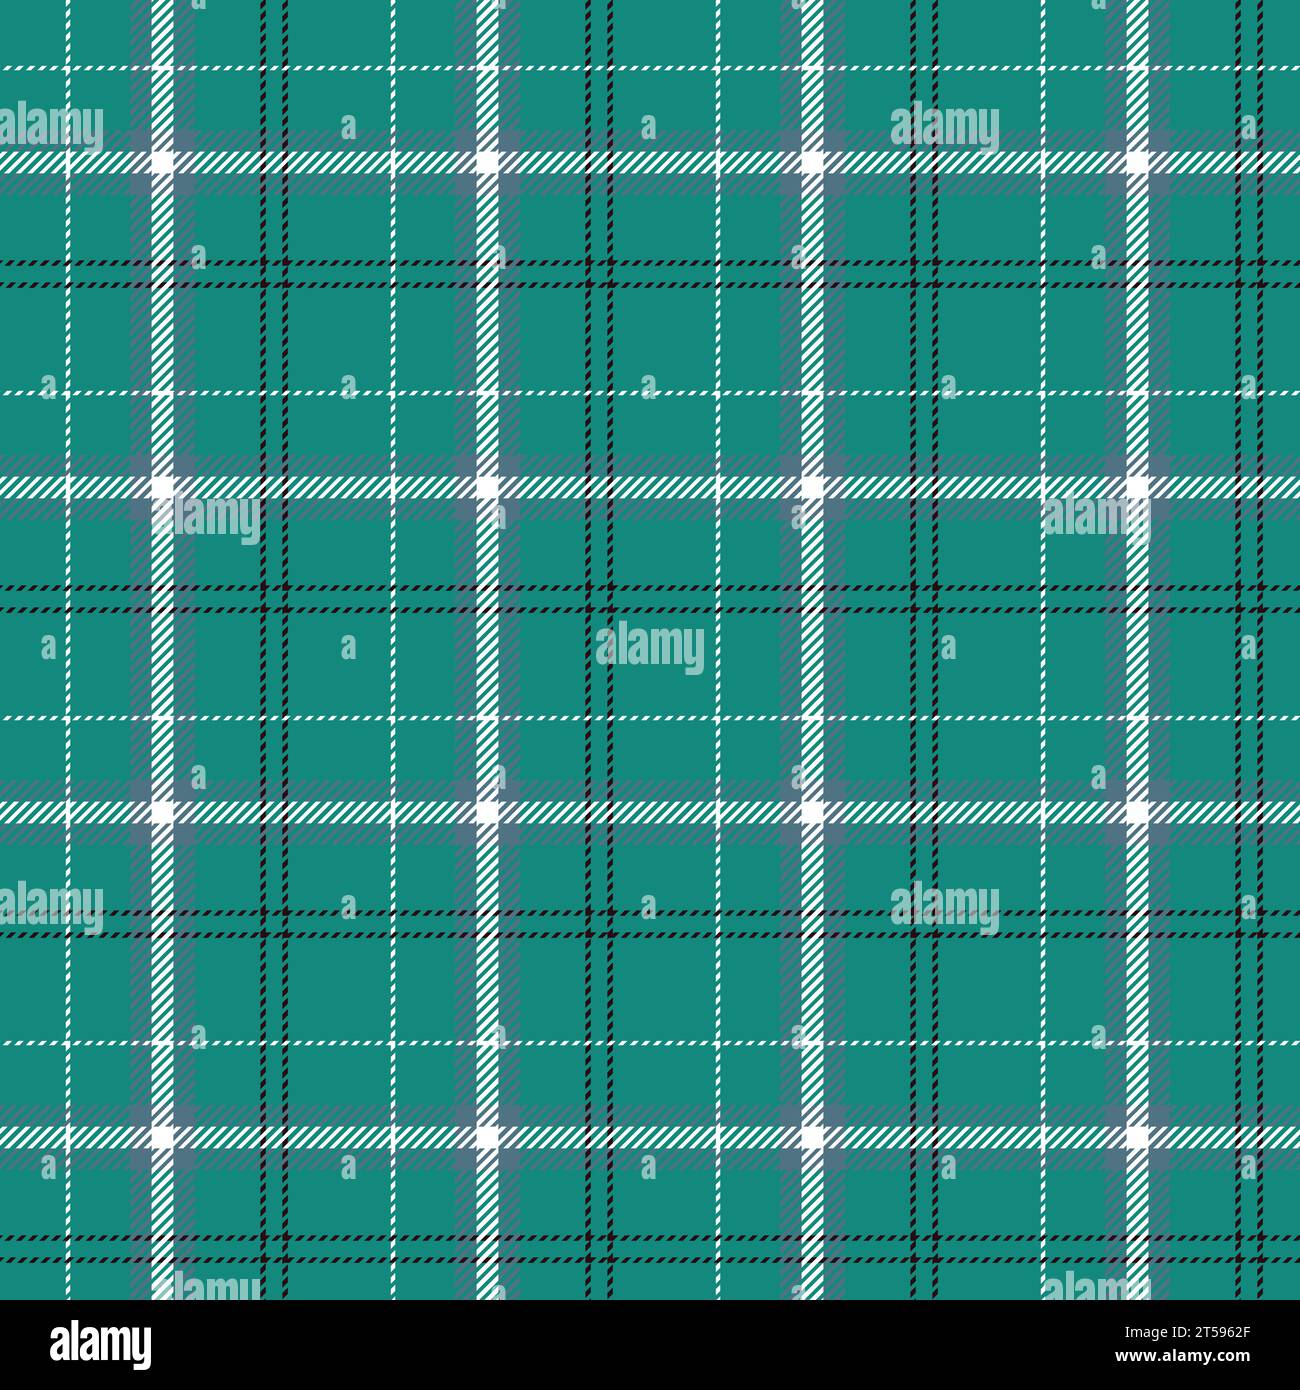 continuous pattern in cloth tartan vector Stock Vector